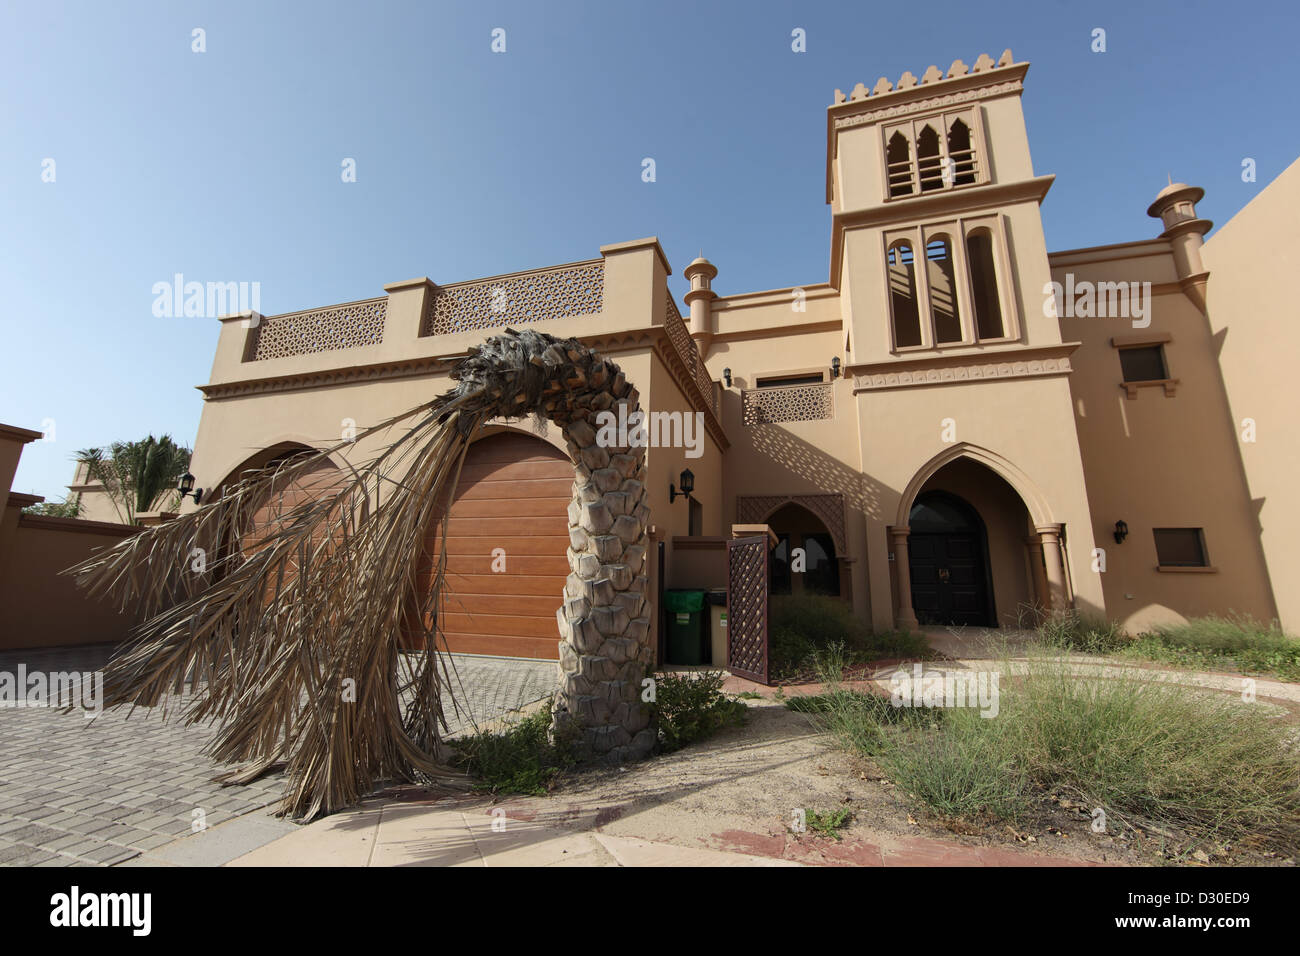 Dubai, United Arab Emirates, dried palm tree in front of a deserted house Stock Photo